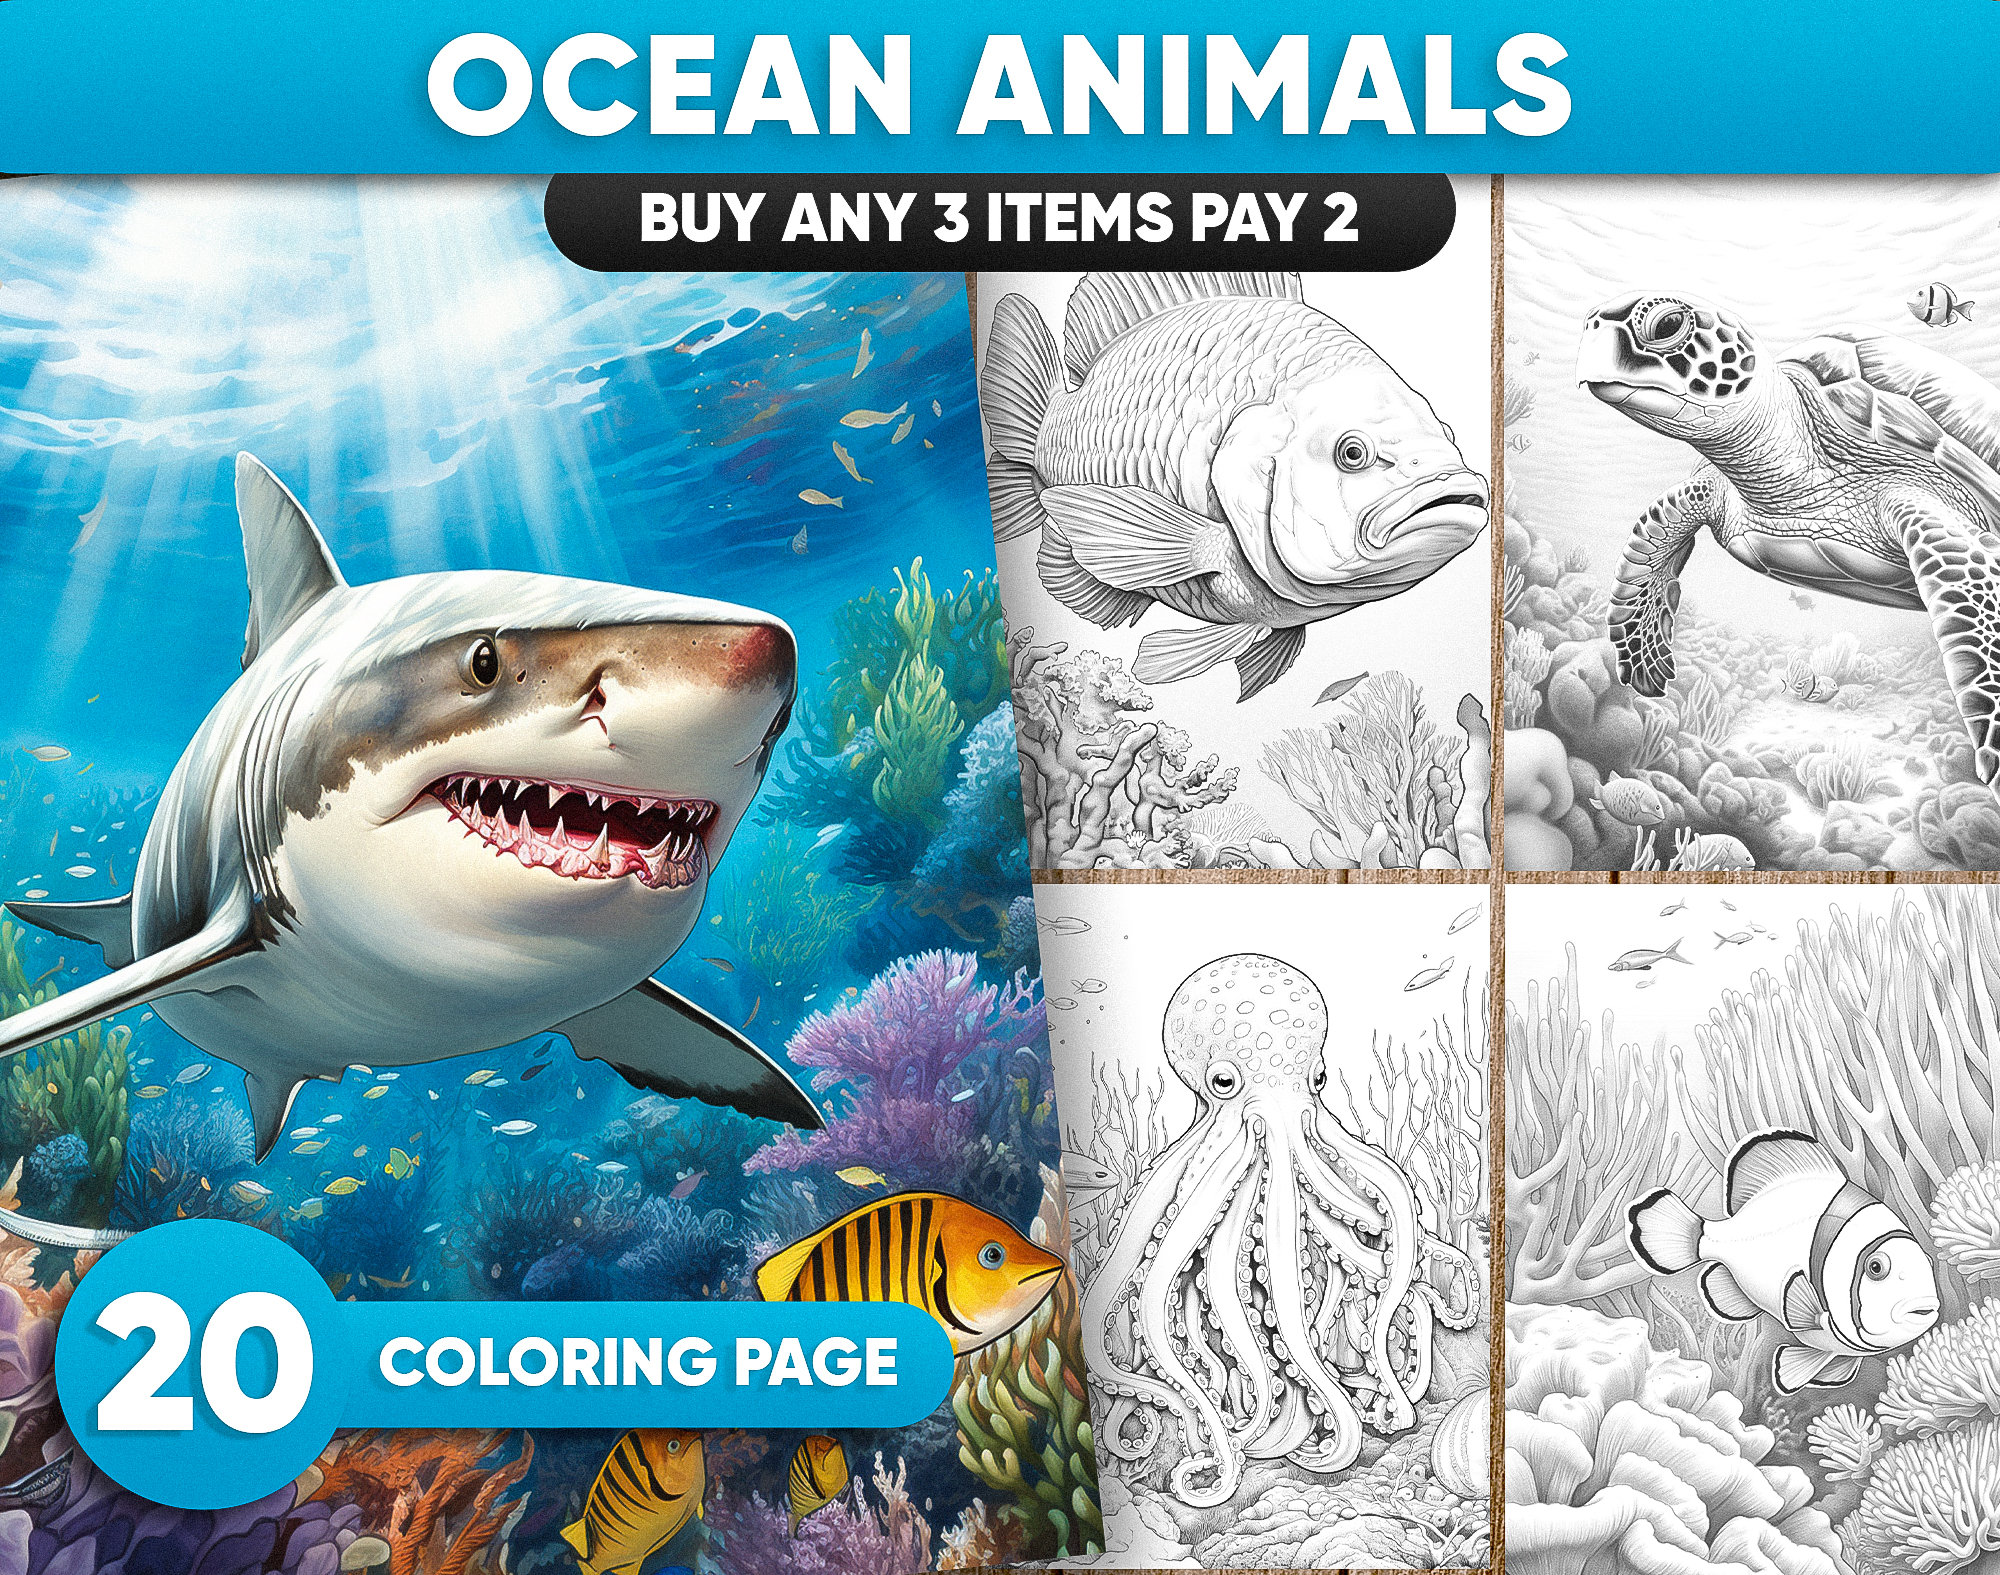 Ocean animals grayscale coloring pages for adults jpg and pdf file instant download printable coloring pages